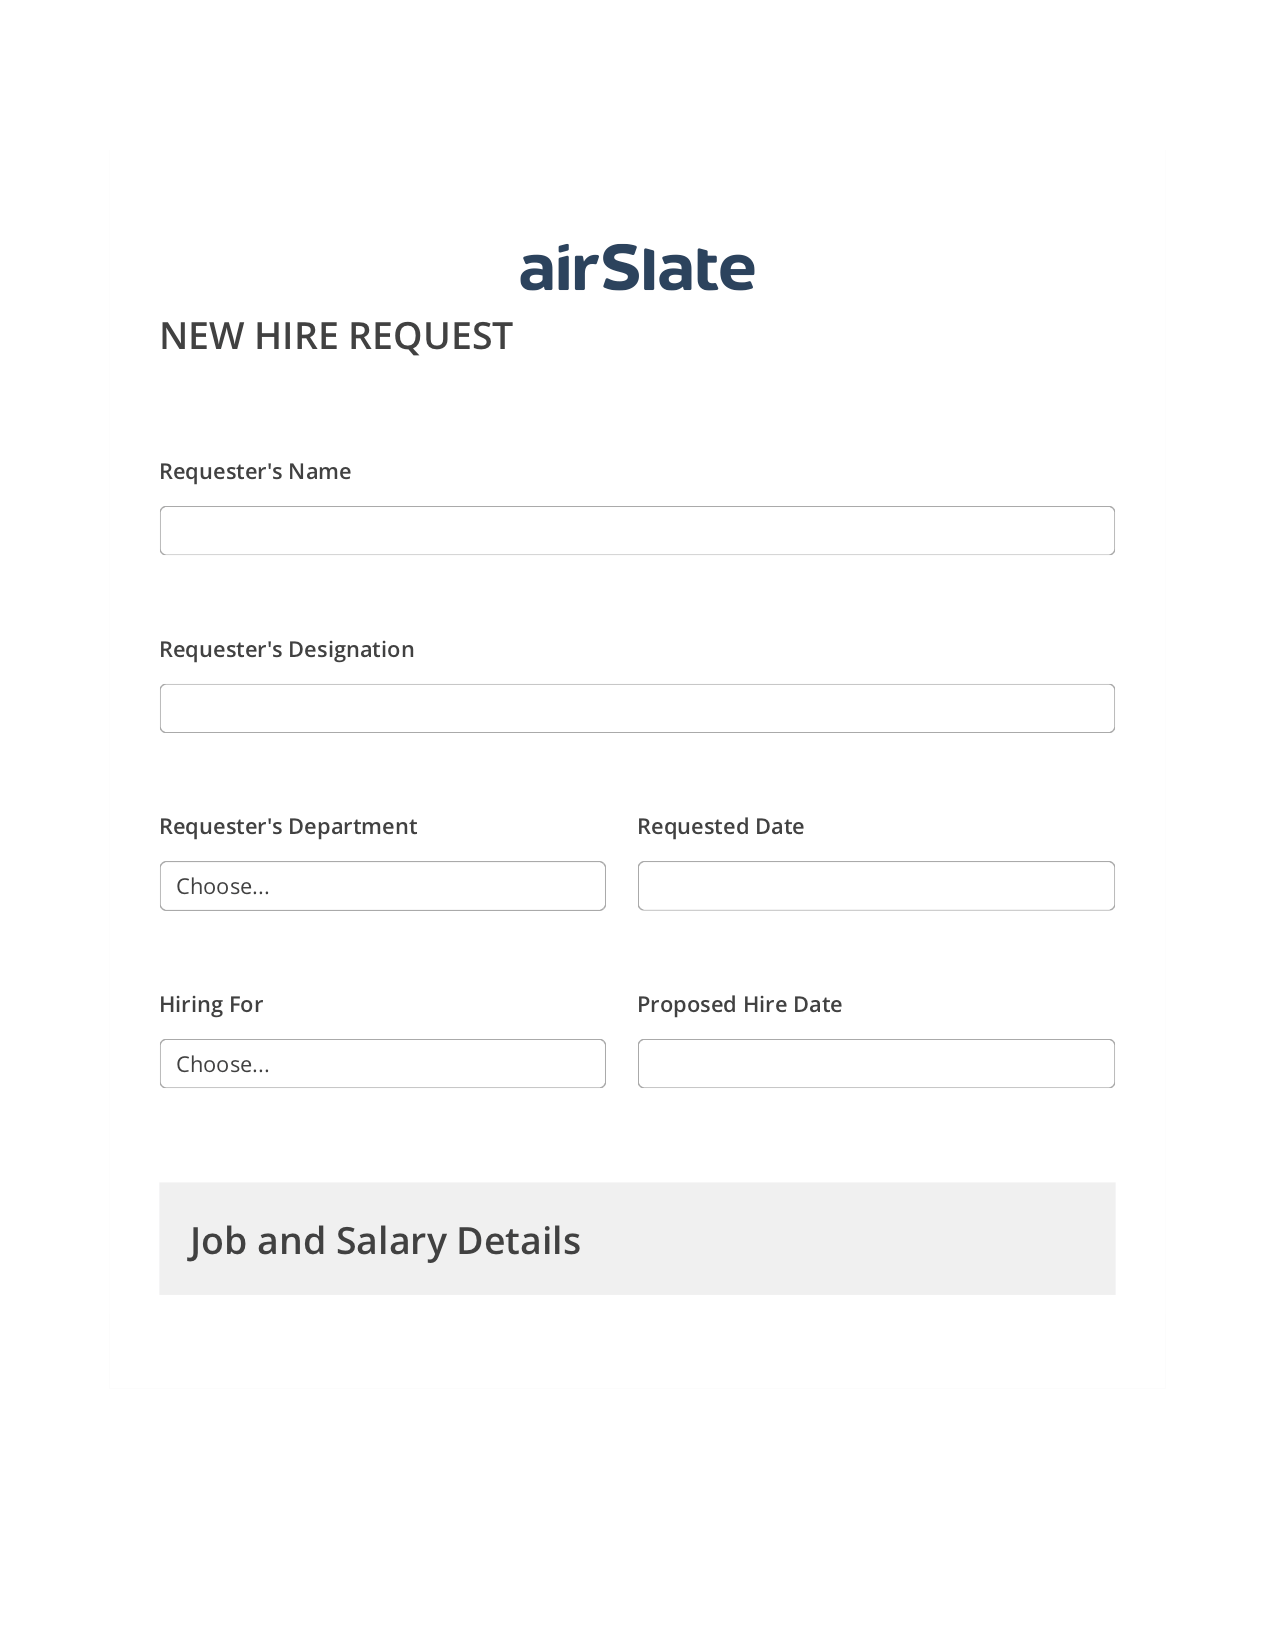 Hiring Request Workflow Pre-fill from MS Dynamics 365 Records, Send Mailchimp Campaign Bot, Export to Google Sheet Bot